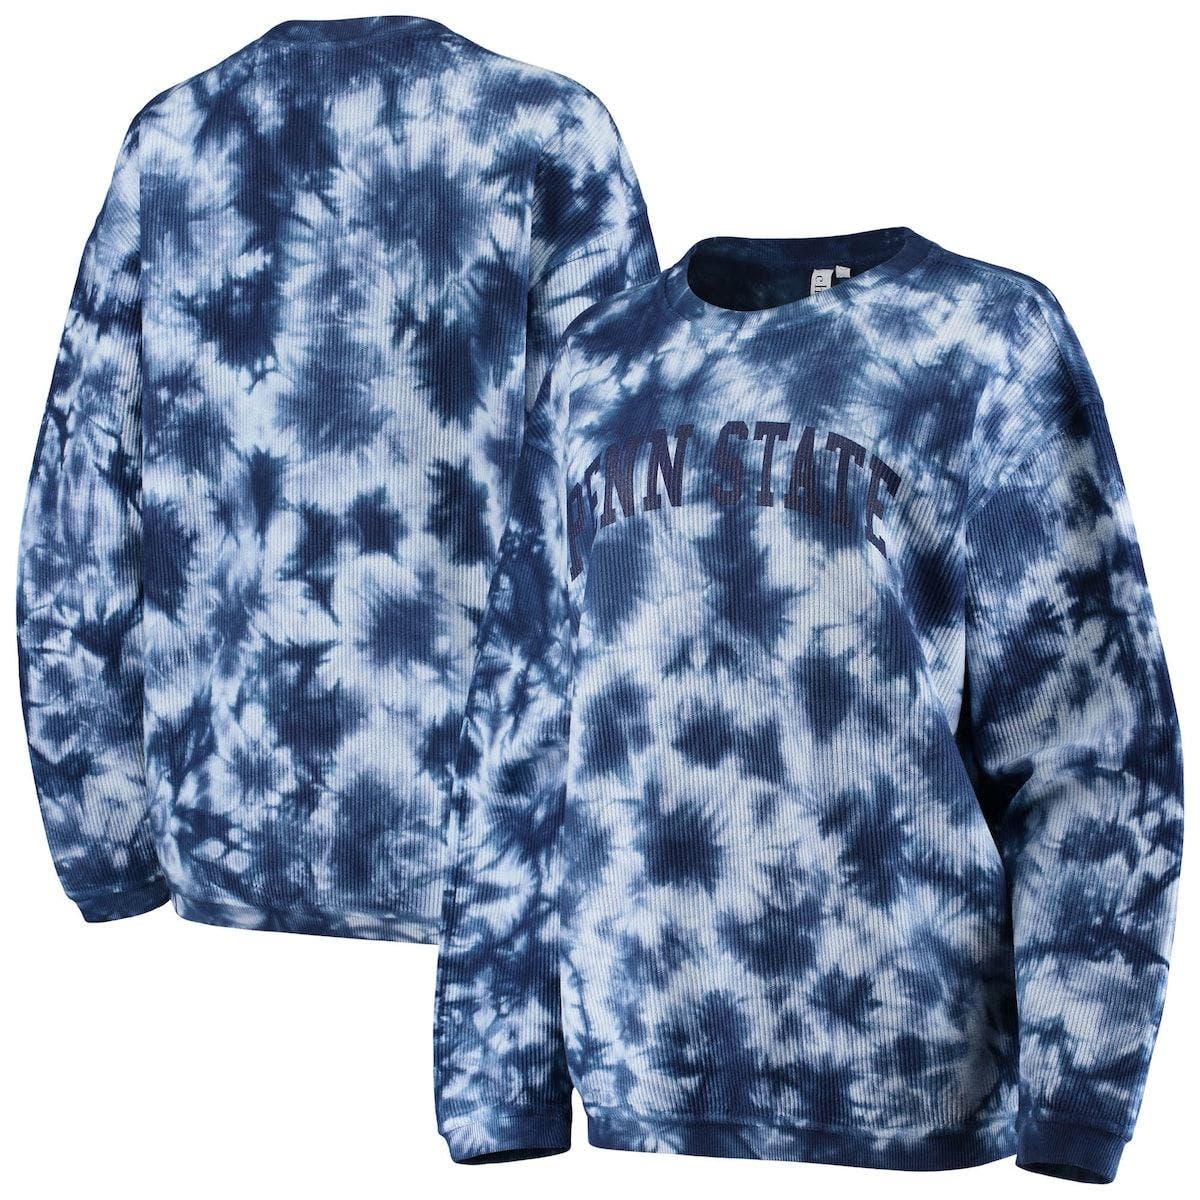 CHICKA-D Women's chicka-d White/Navy Penn State Nittany Lions Tie Dye Corded Pullover Sweatshirt at Nordstrom